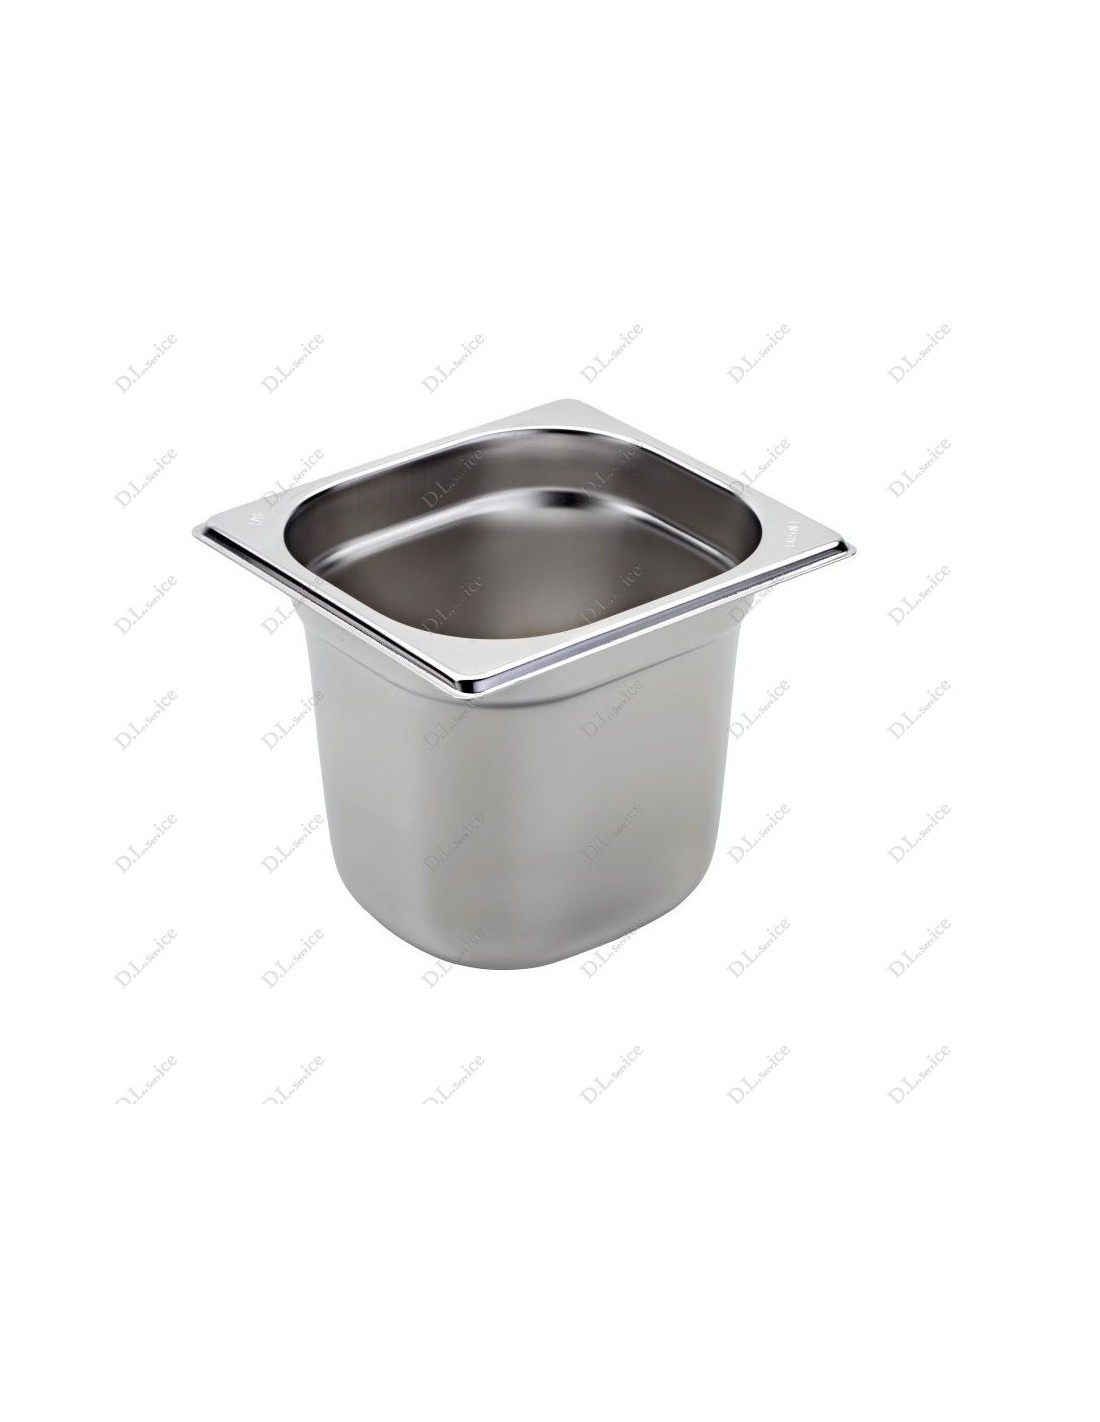 - Stainless steel containers GN 1/6 mm 150 h - Capacity 2.5 l - Dimensions 17.6 x 16.2 x 15 h cm